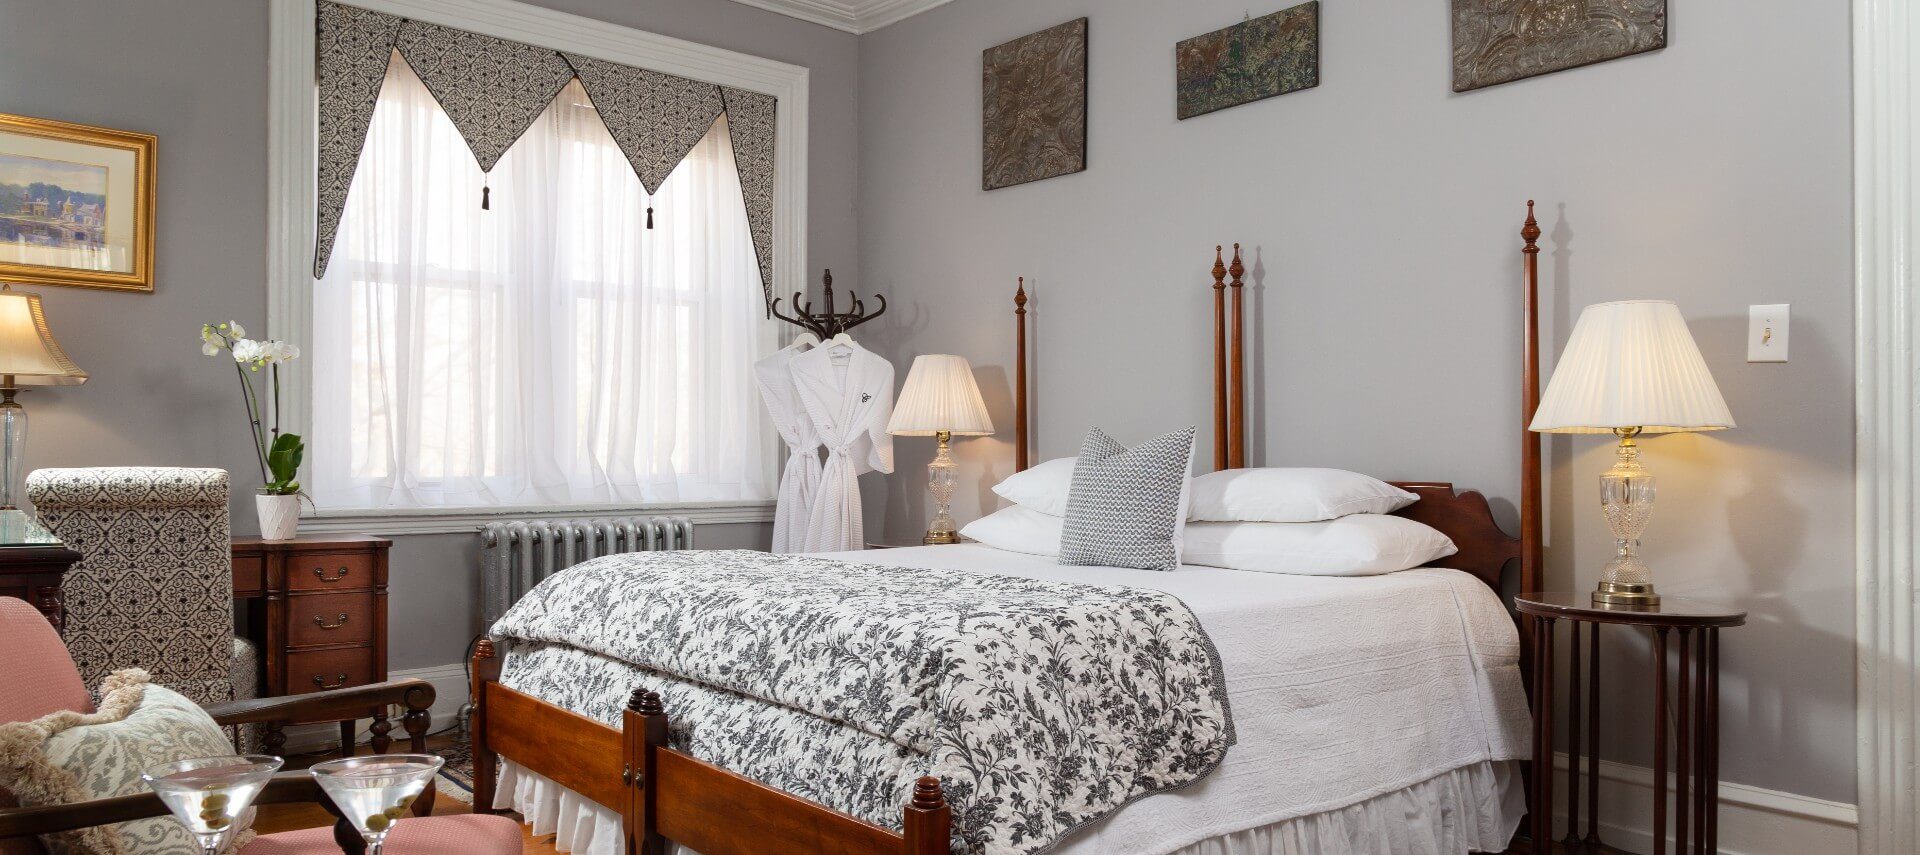 Spacious guest suite with king bed, side tables with lamps and sitting chair with a table